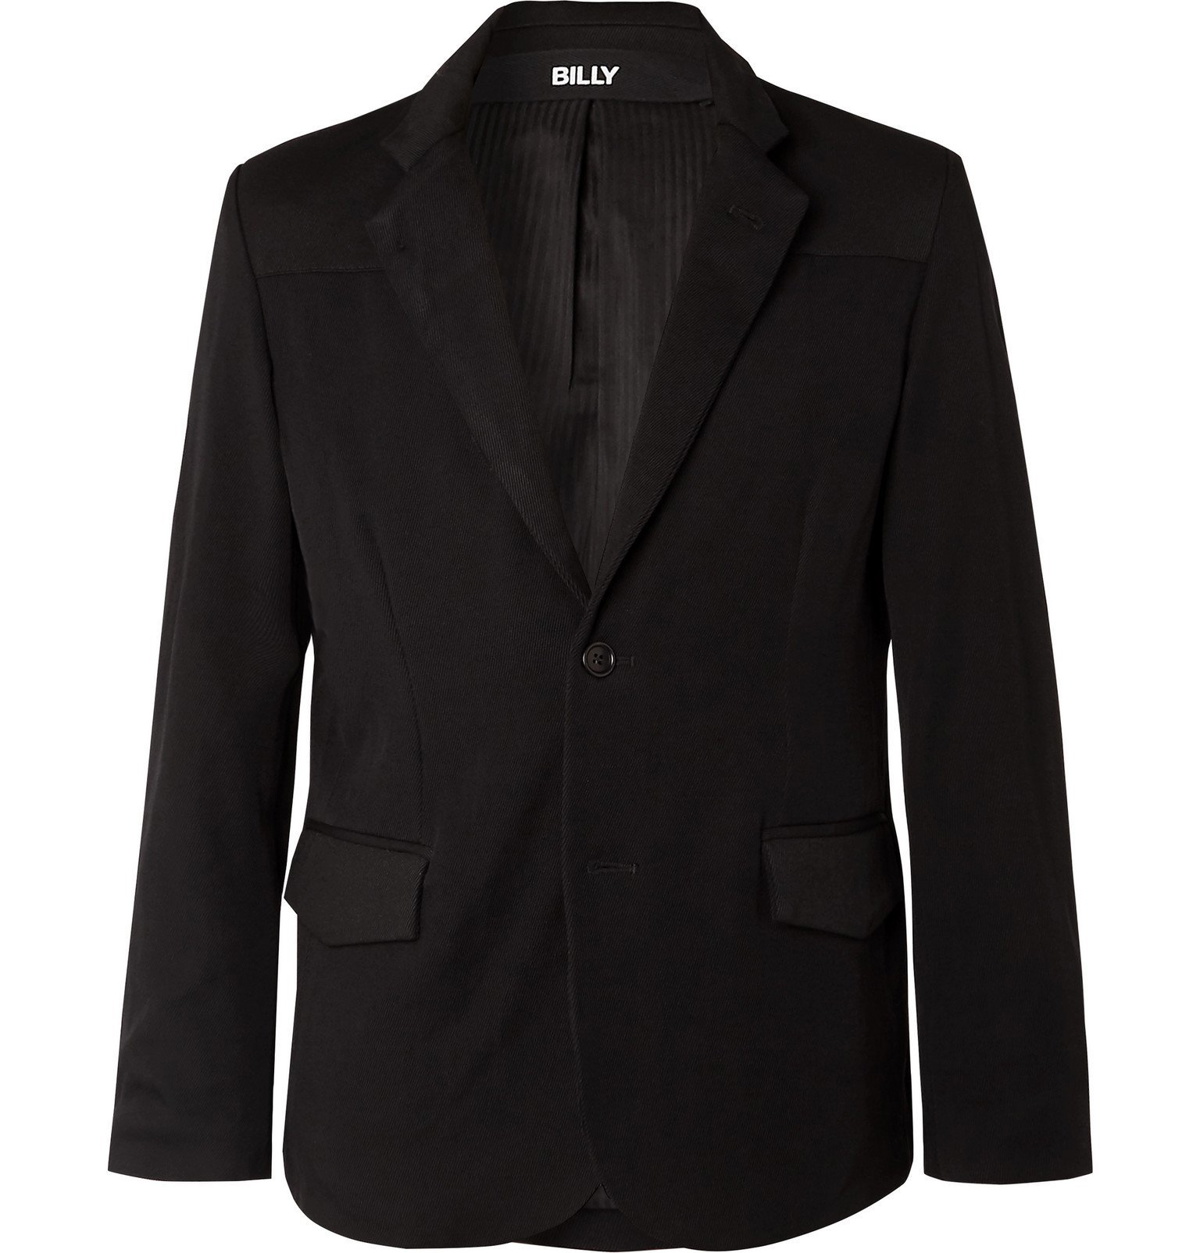 BILLY - Black Wool-Twill and Waxed-Cotton Suit Jacket - Black Billy